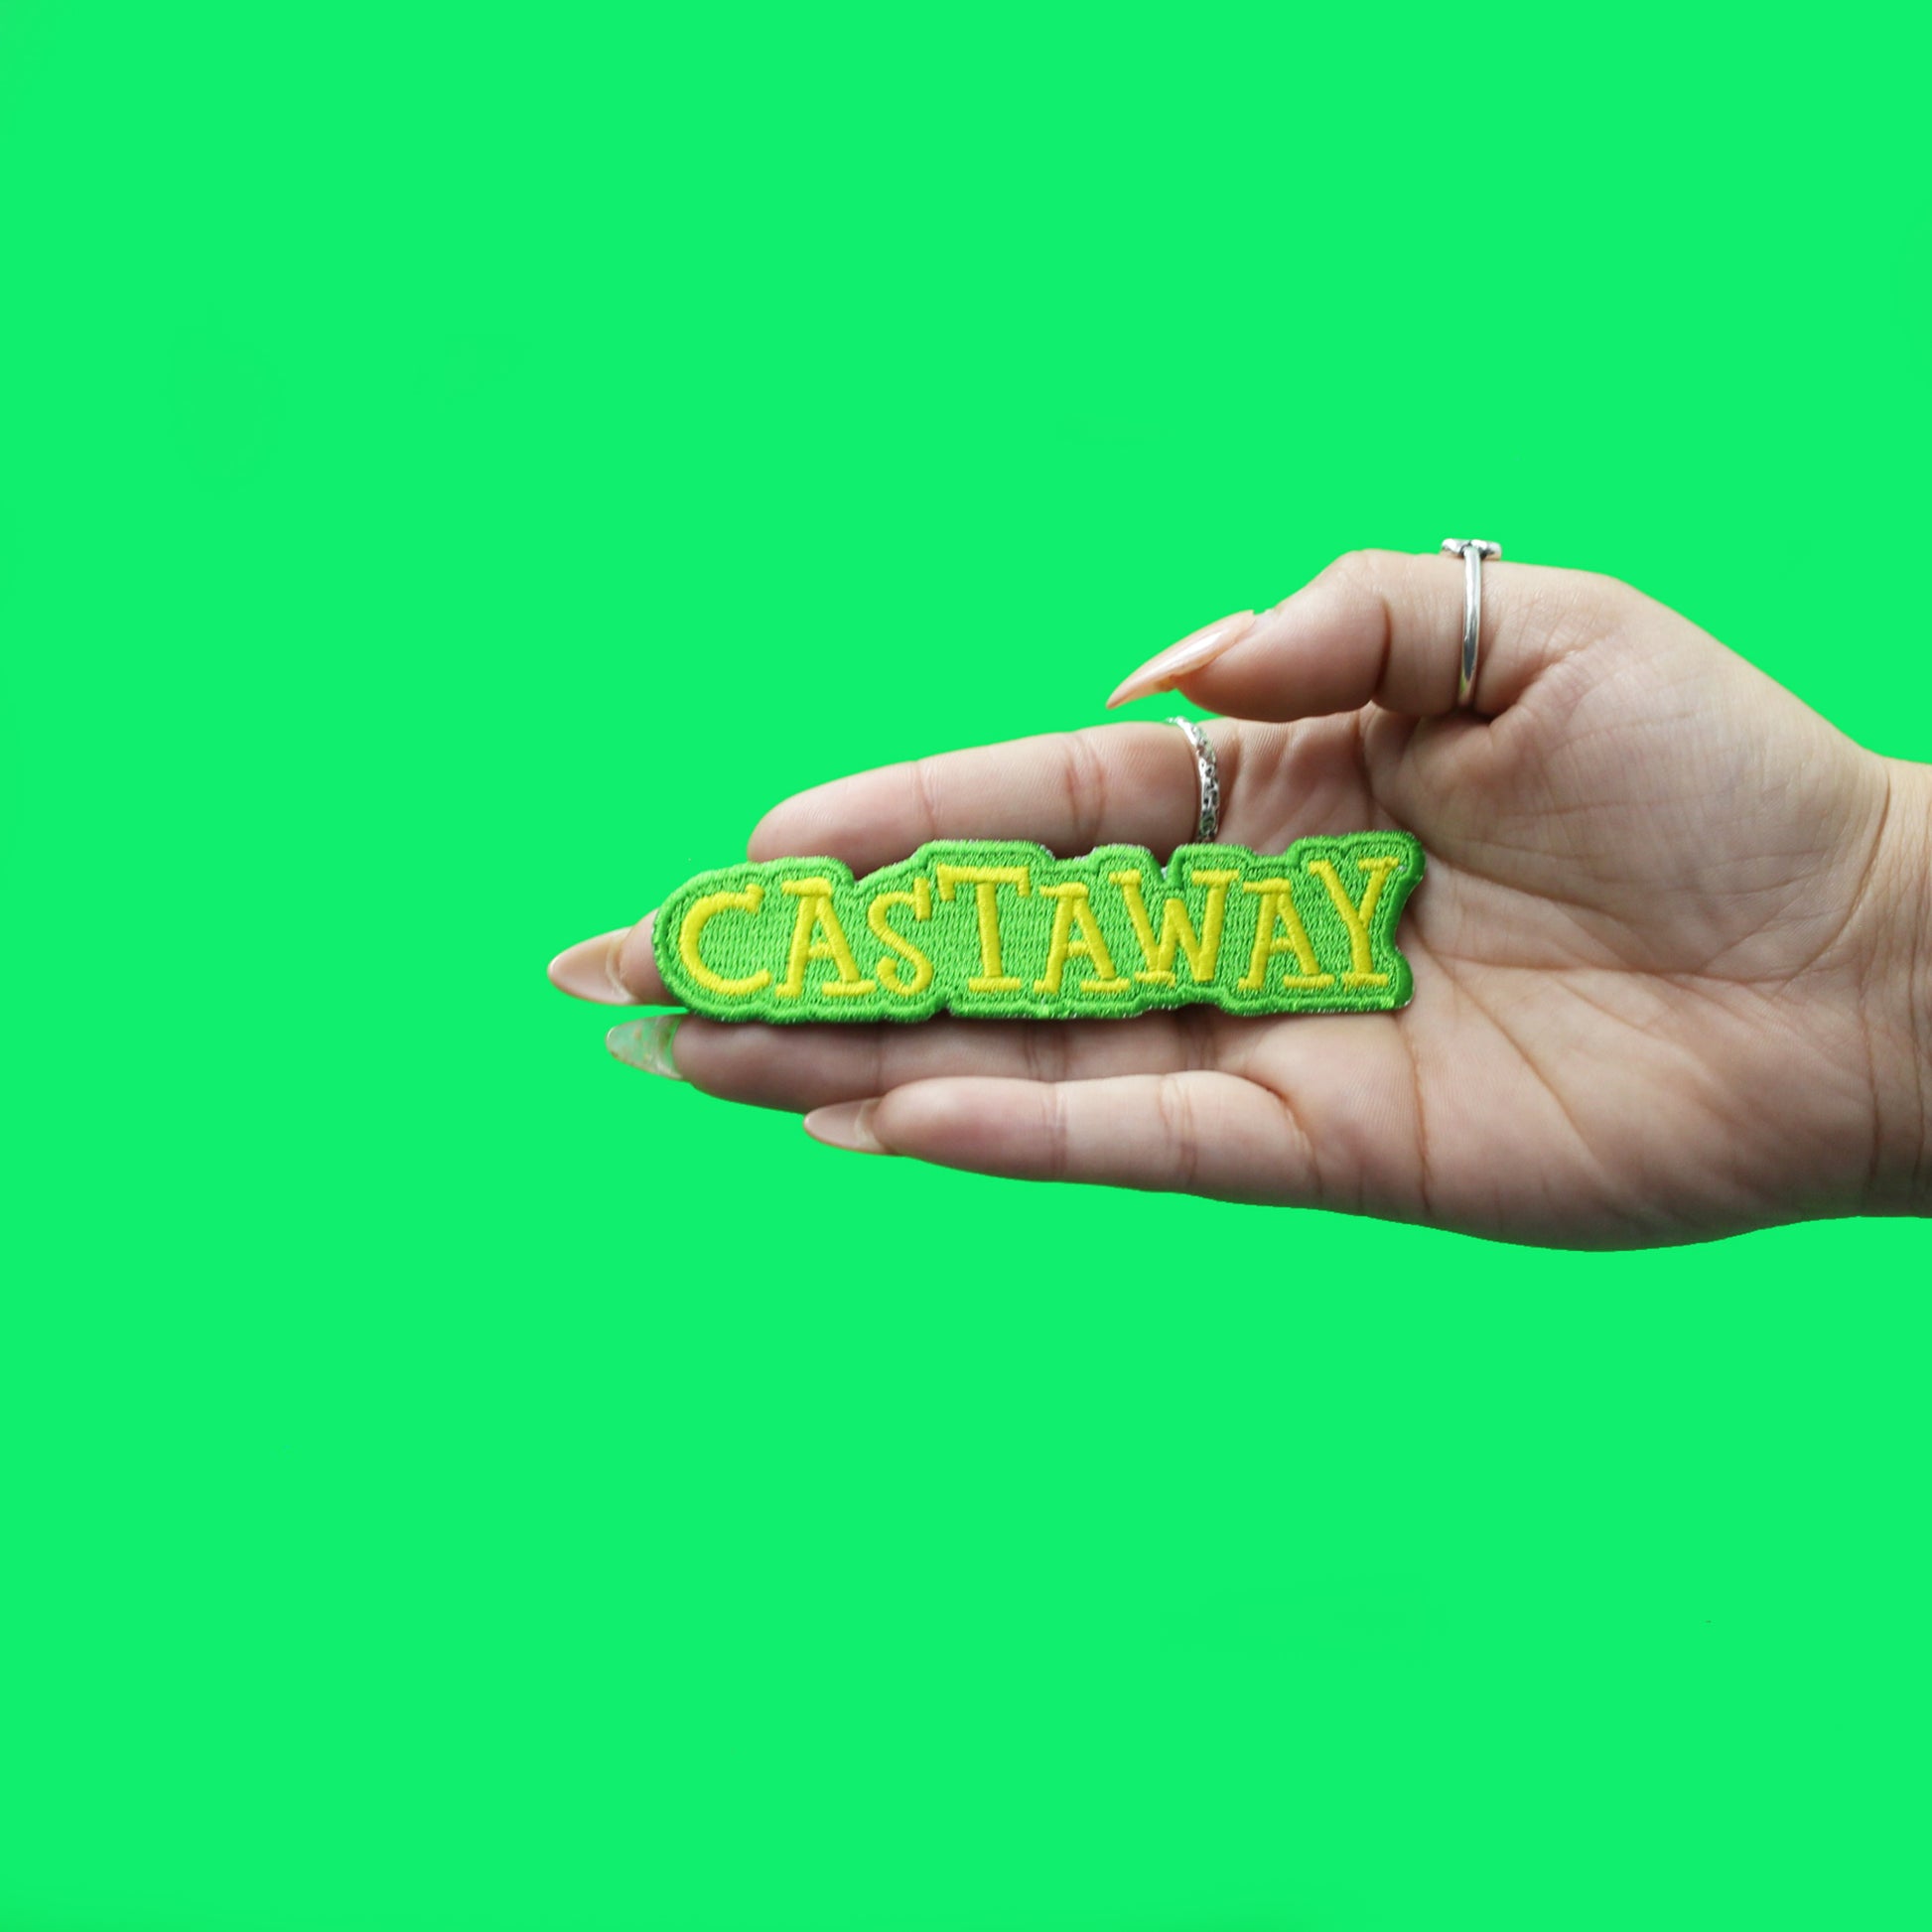 Castaway Patch Cartoon Song Embroidered Iron On 